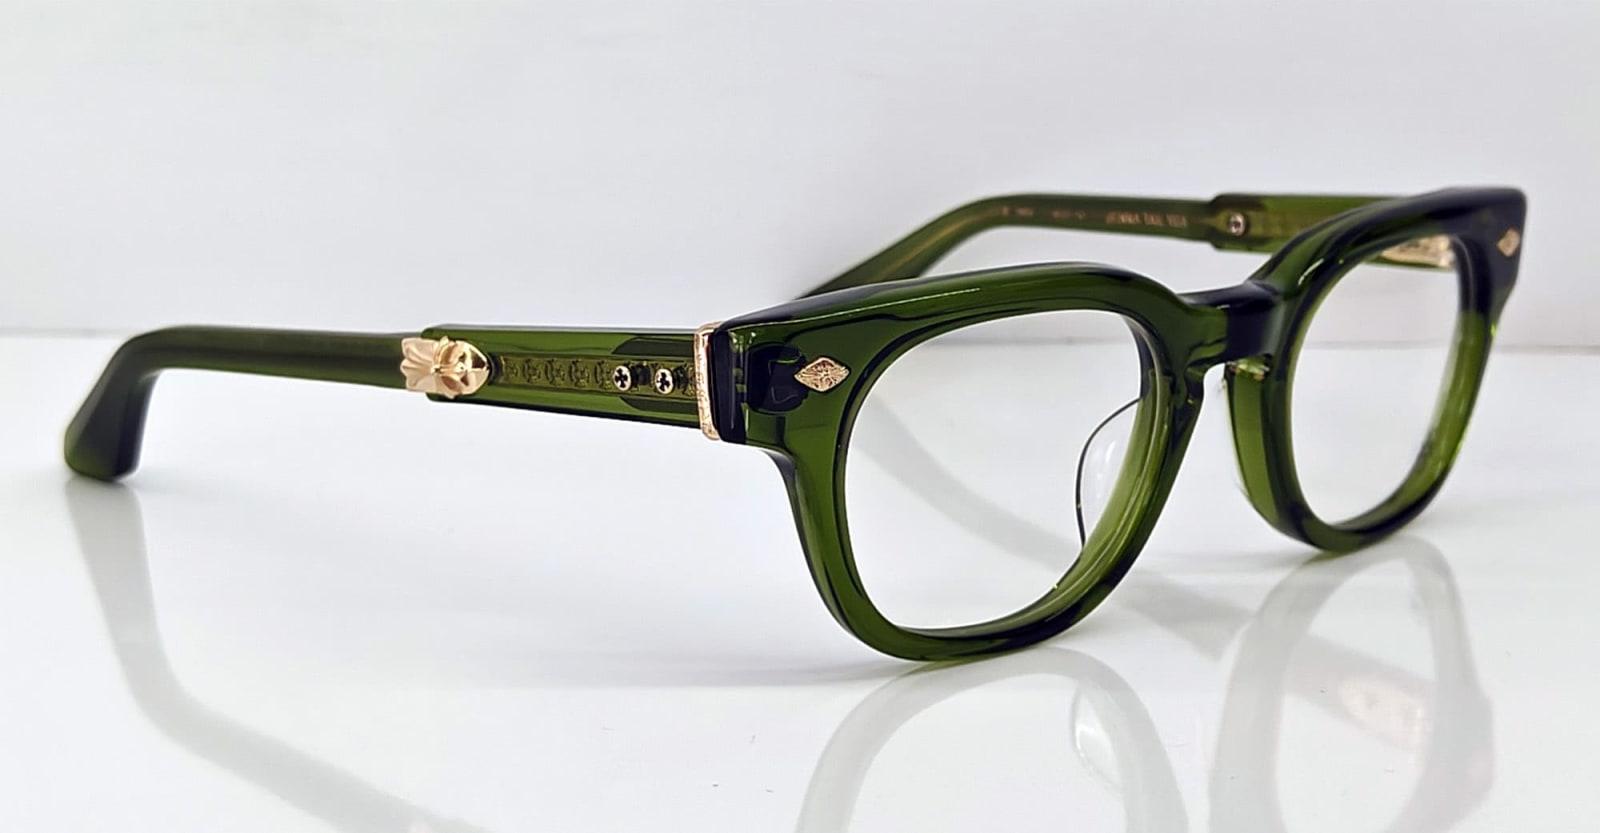 Chrome Hearts Jenna Tail Yea - Dark Olive Rx Glasses in Black for 